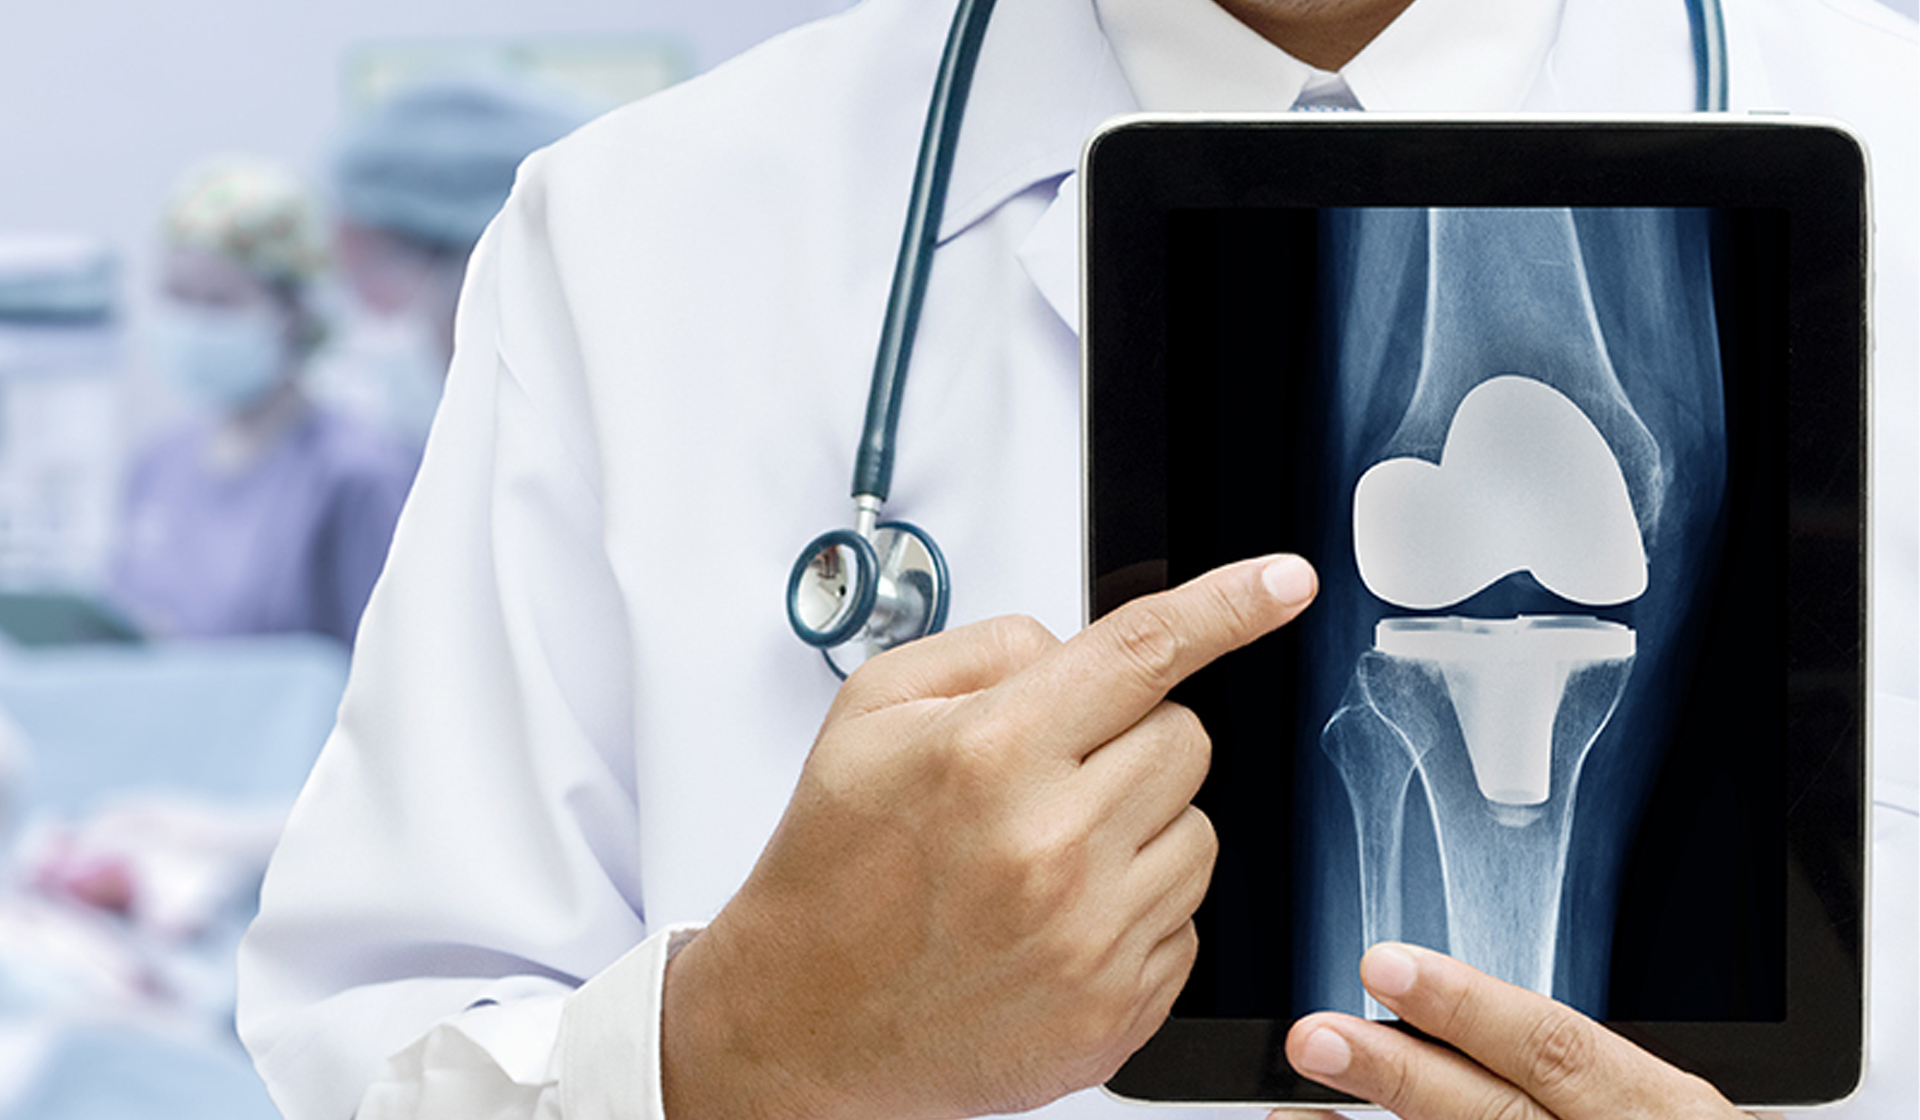 Primary Joint Replacement Surgeries